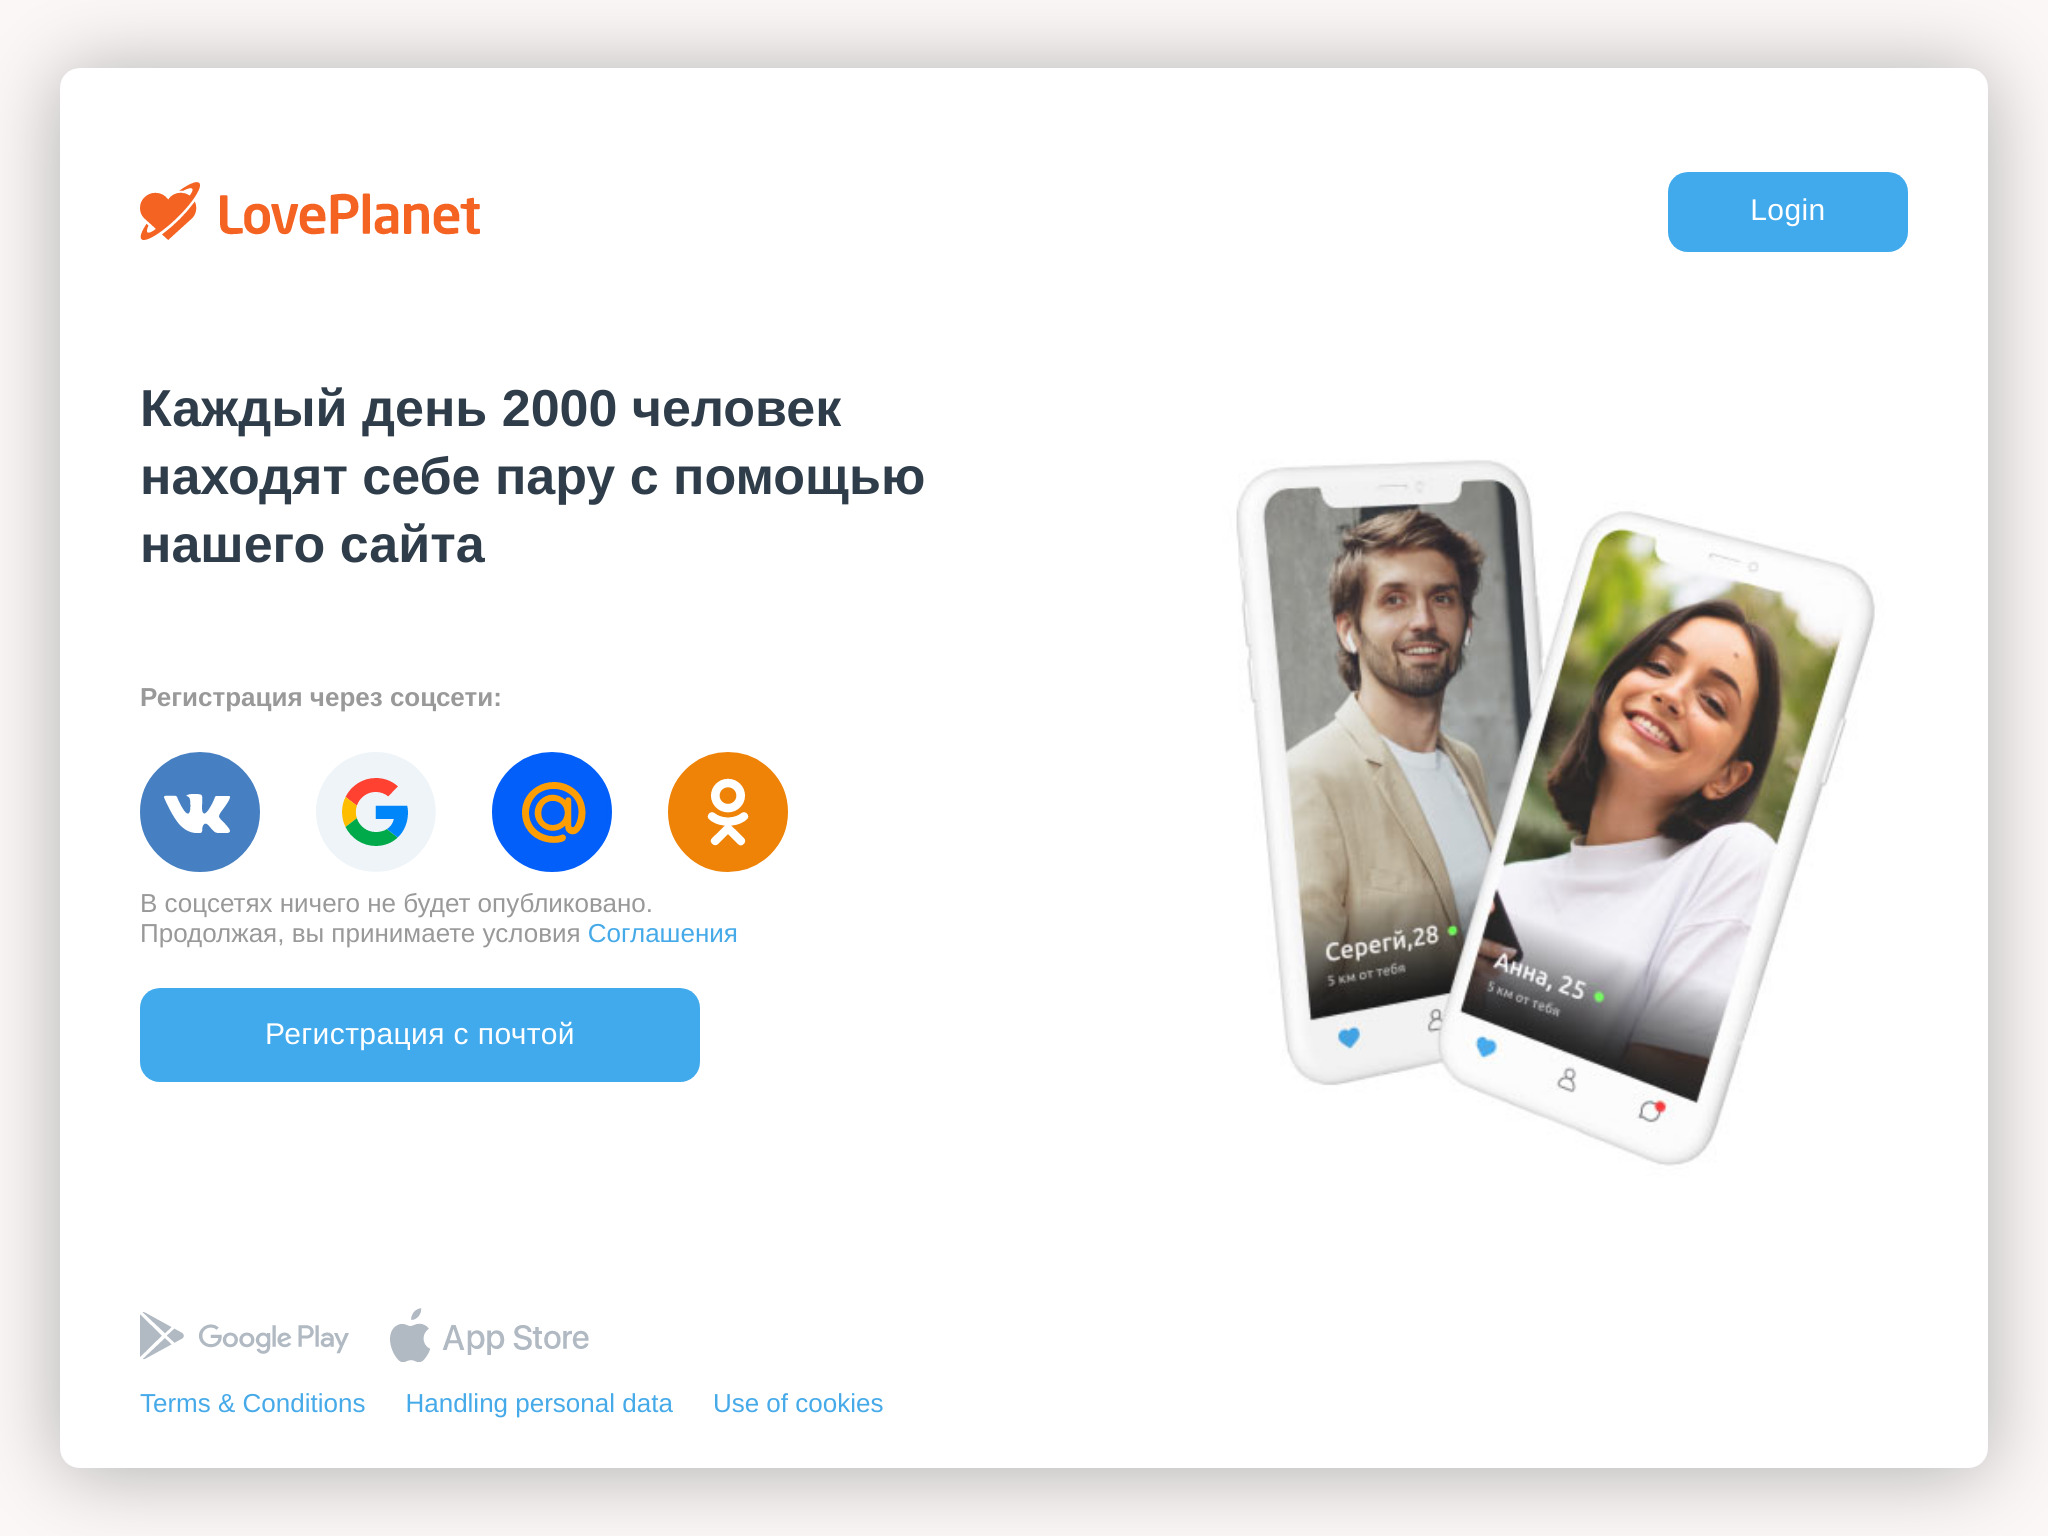 LovePlanet 2023 Review: A Unique Dating Opportunity Or Just A Scam?